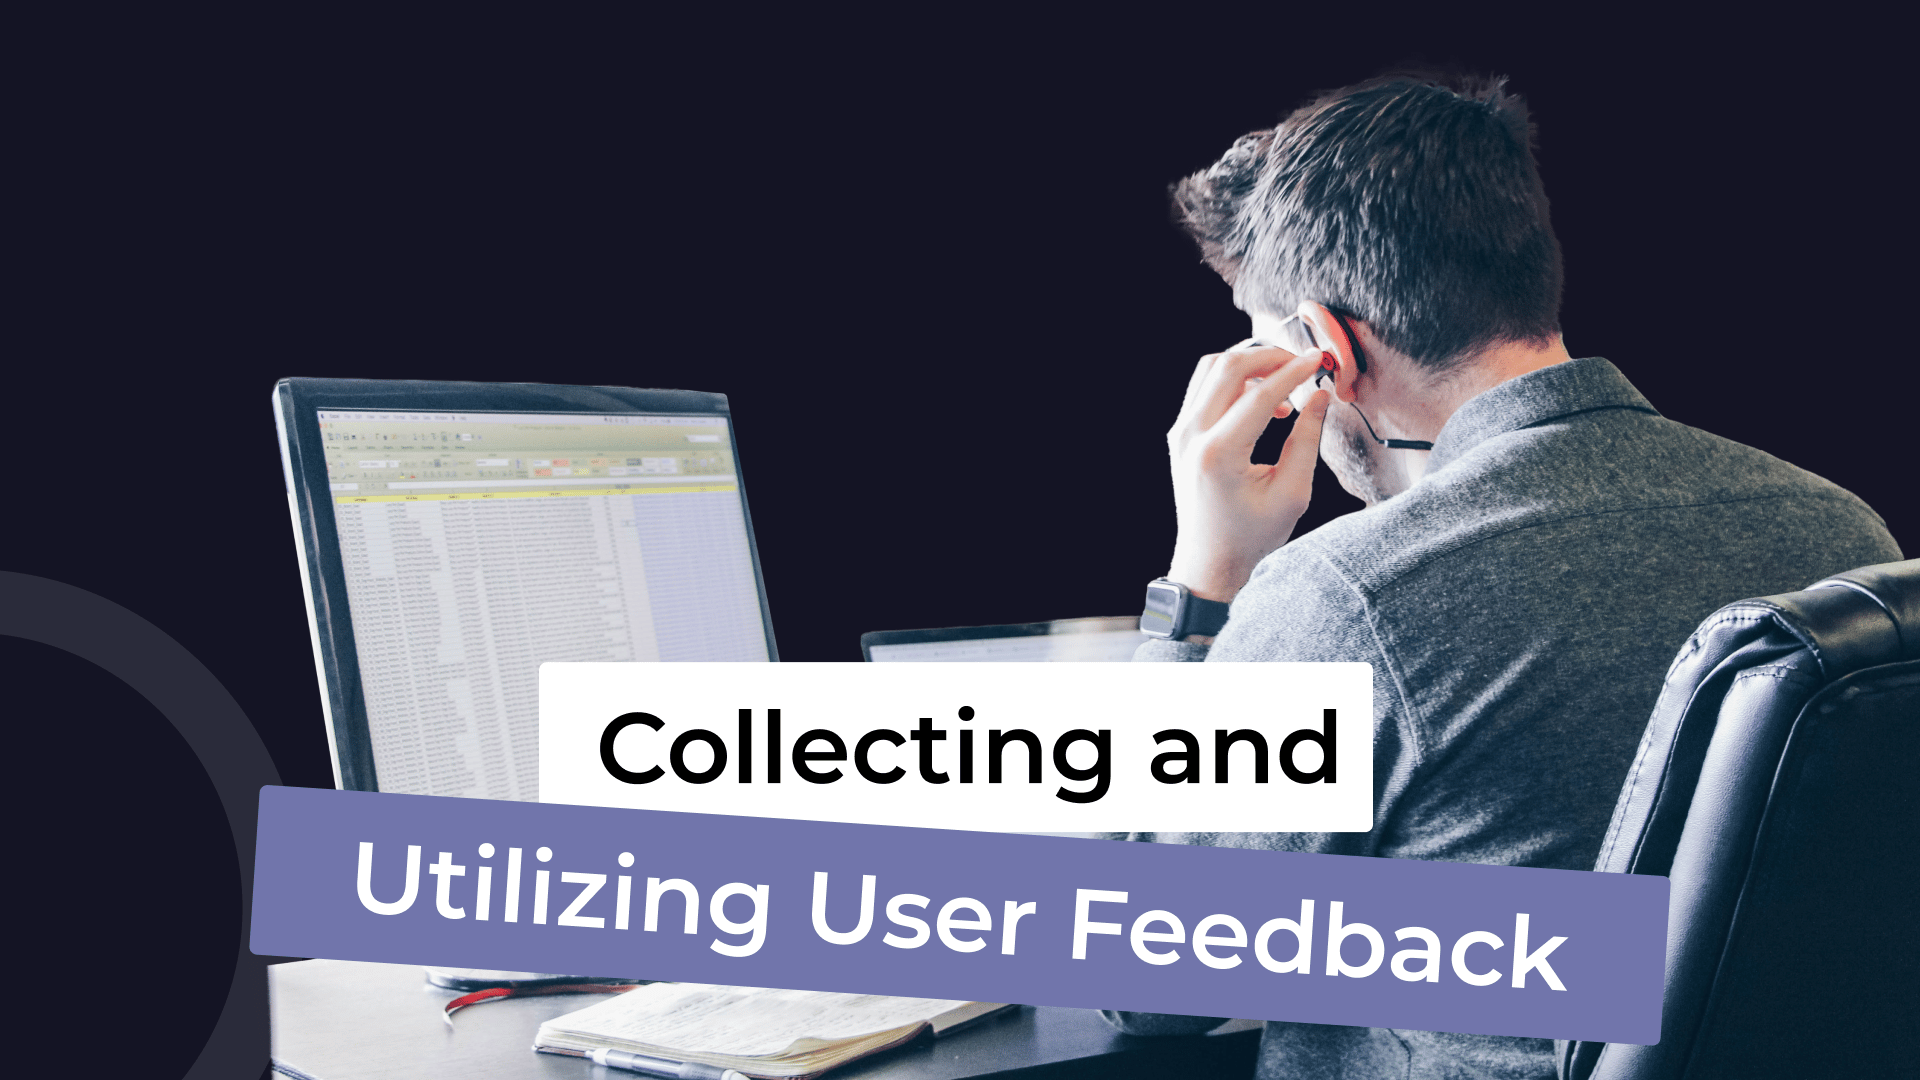 A Founder’s Guide to Collecting and Utilizing User Feedback